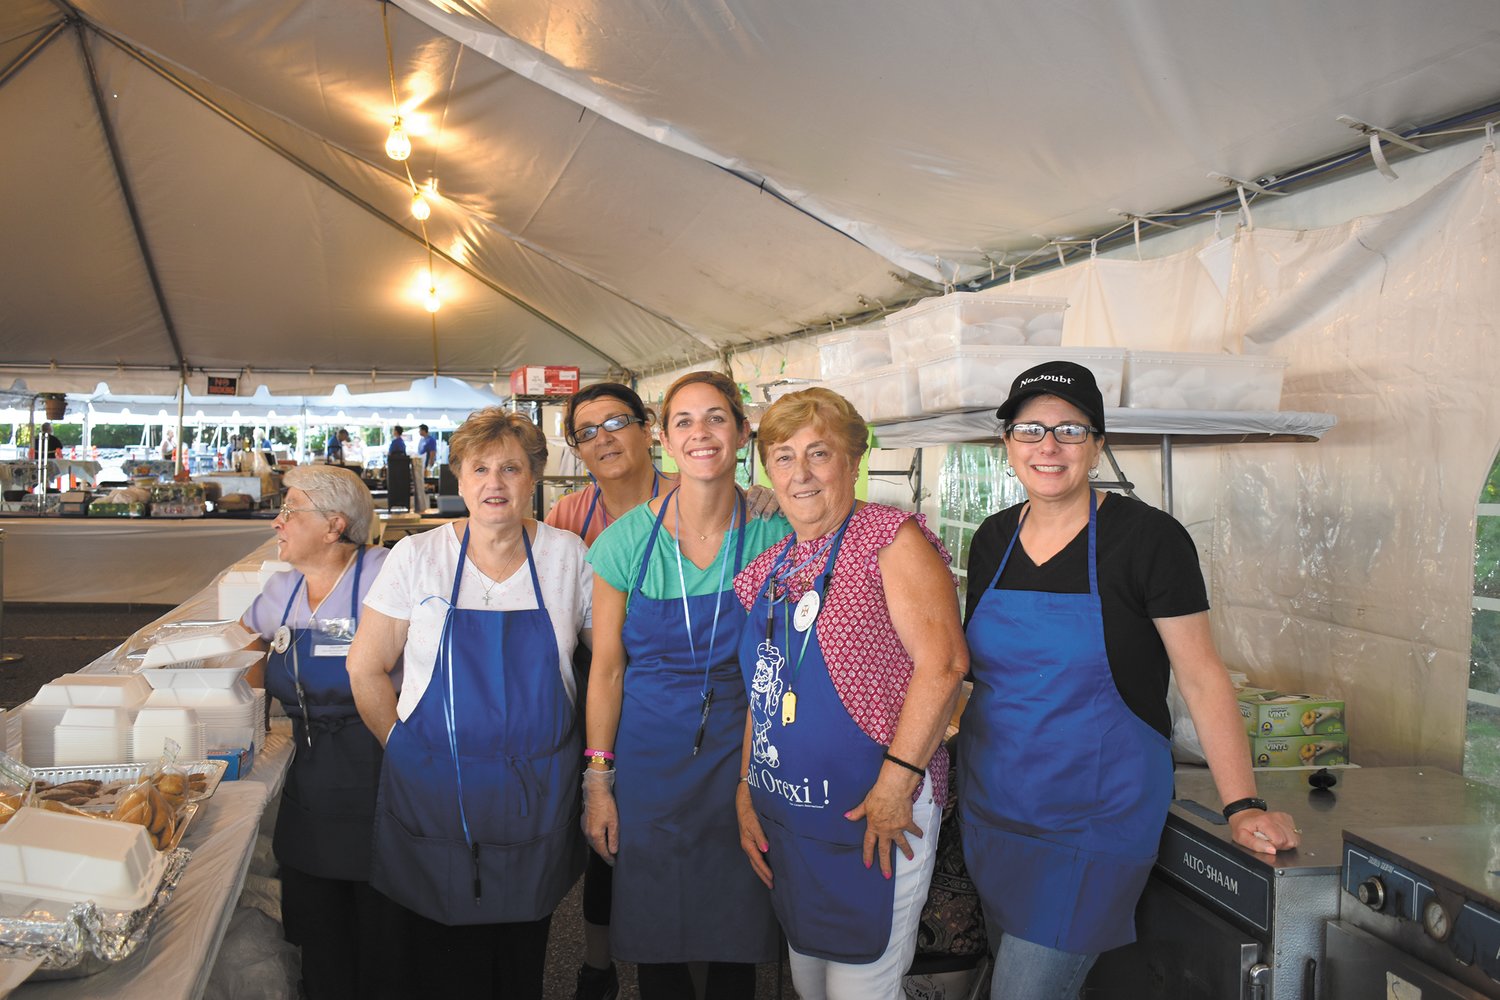 PASTRY PALS: Among the many ladies who volunteered to staff the Pastry Shoppe during last weekend’s Cranston Greek Festival are: Pauline Haralambides, Roula Pryous, Kathy Grammas, Tricia Rougas and Koula Rougas. (Photos courtesy of Nikki Poulos)